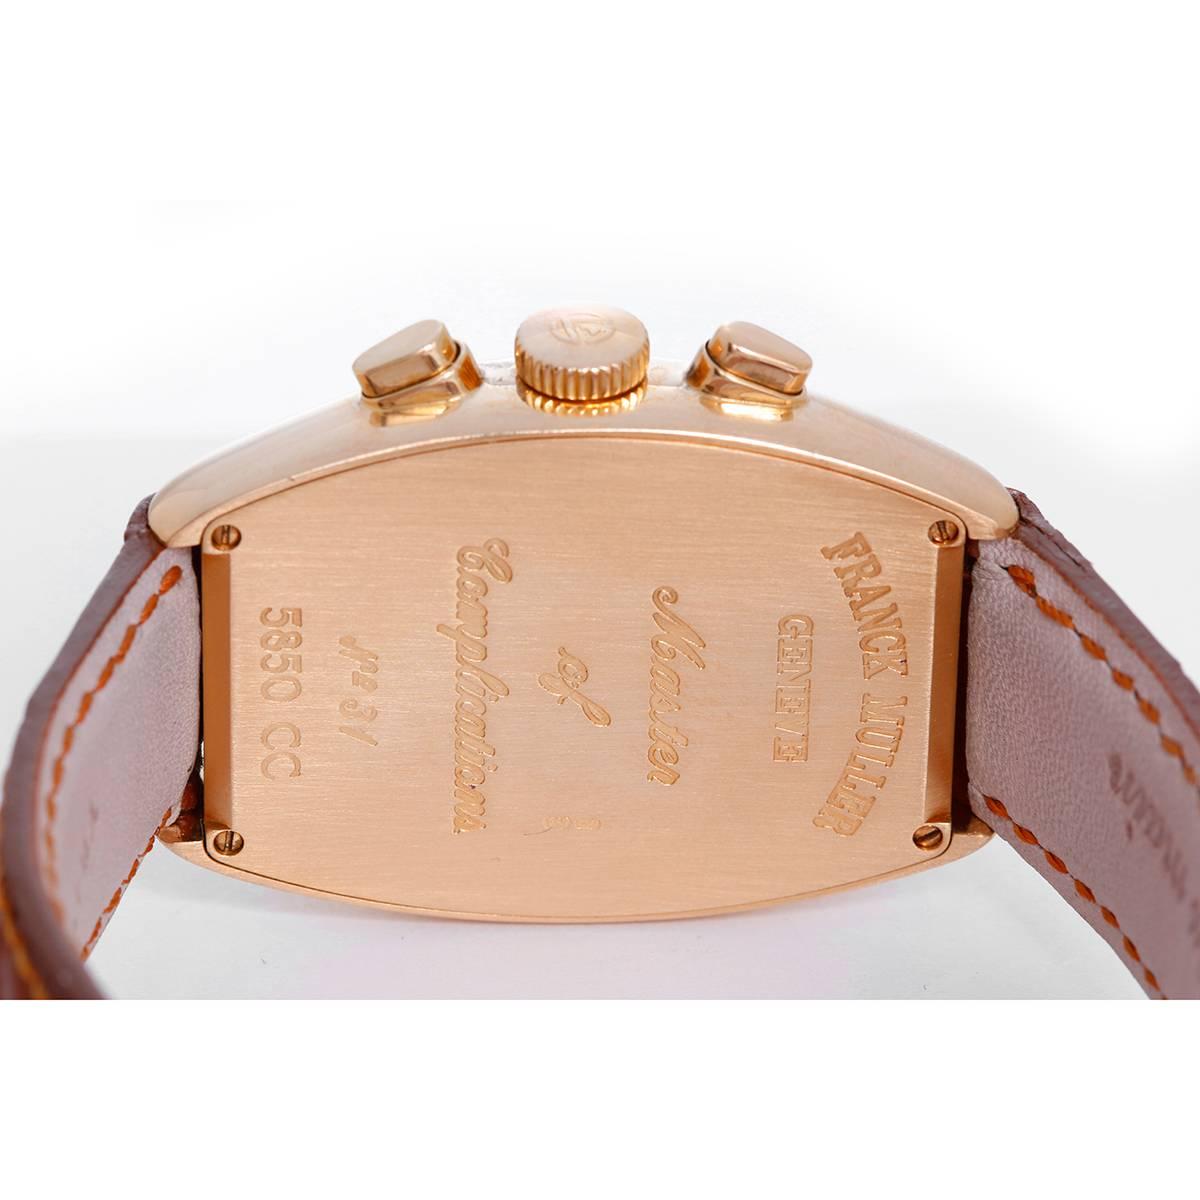 Franck Muller Chronograph 18k Rose Gold Wristwatch 5850 CC -  Automatic winding. 18k rose gold case (32mm x 45mm). Silvered dial with Arabic numerals; hours, minutes & seconds recorders. Strap band with 18k rose gold Franck Muller buckle.